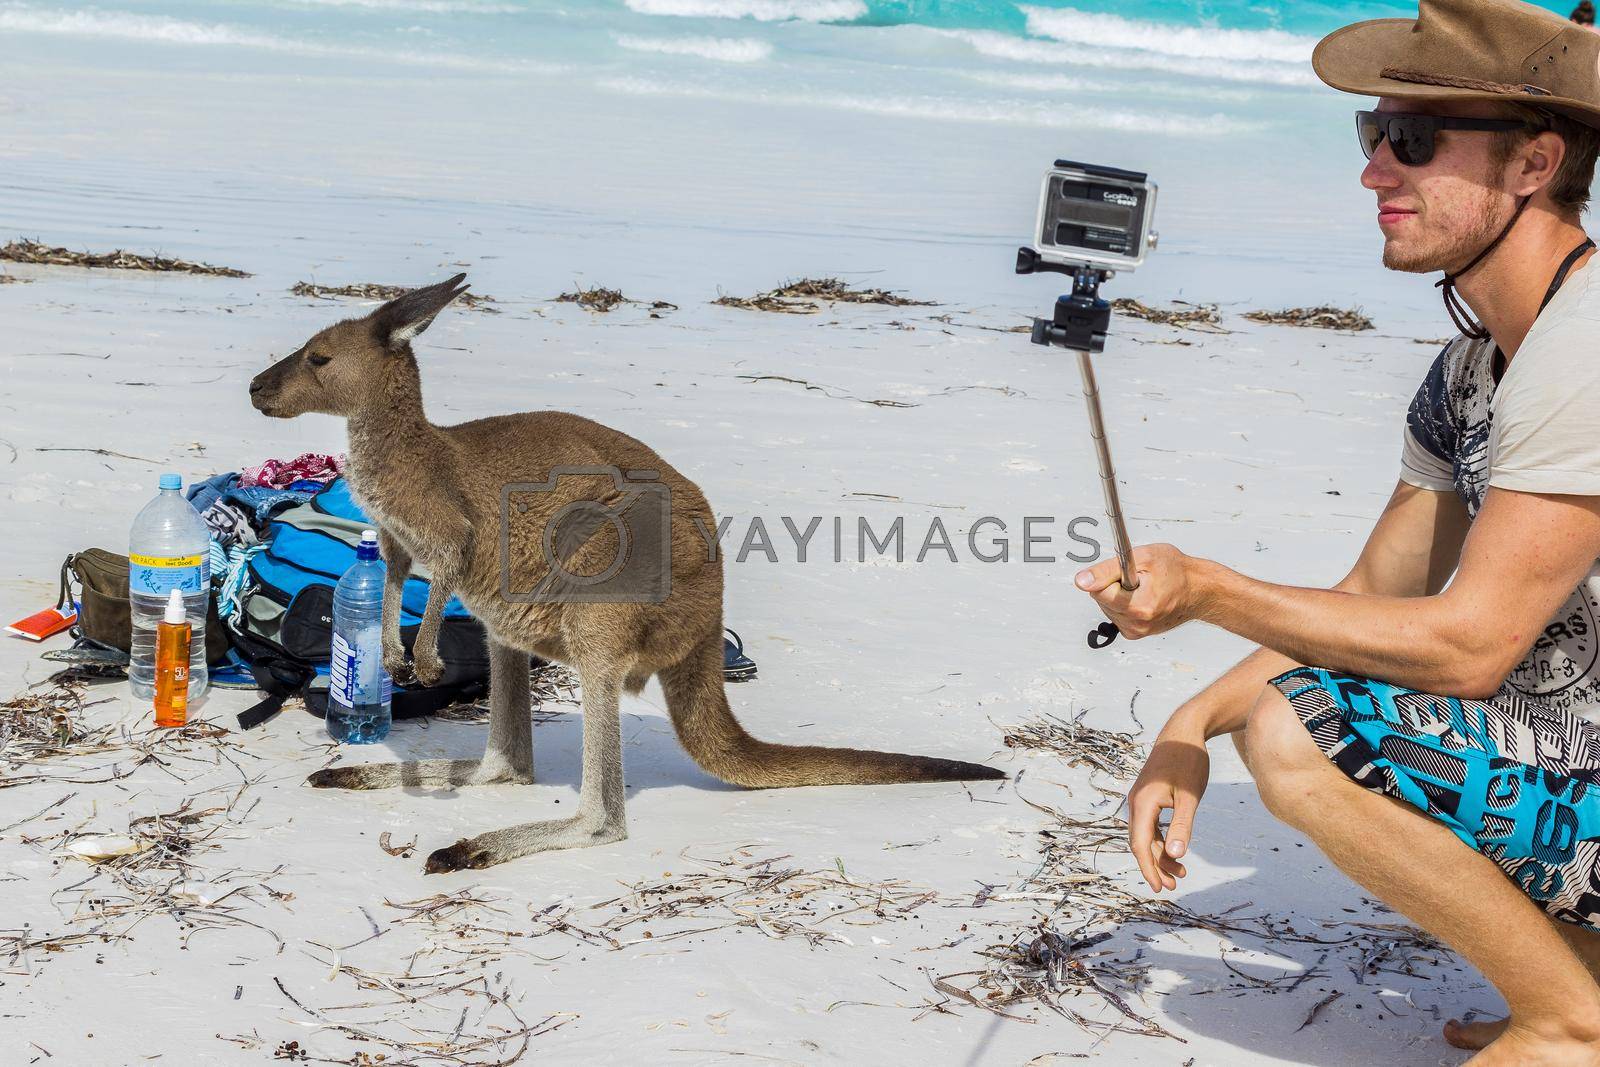 Royalty free image of caucasian man is taking a selfie with a beautiful Kangaroo near a backpack at Lucky Bay Beach in the Cape Le Grand National Park near Esperance, Australia by bettercallcurry